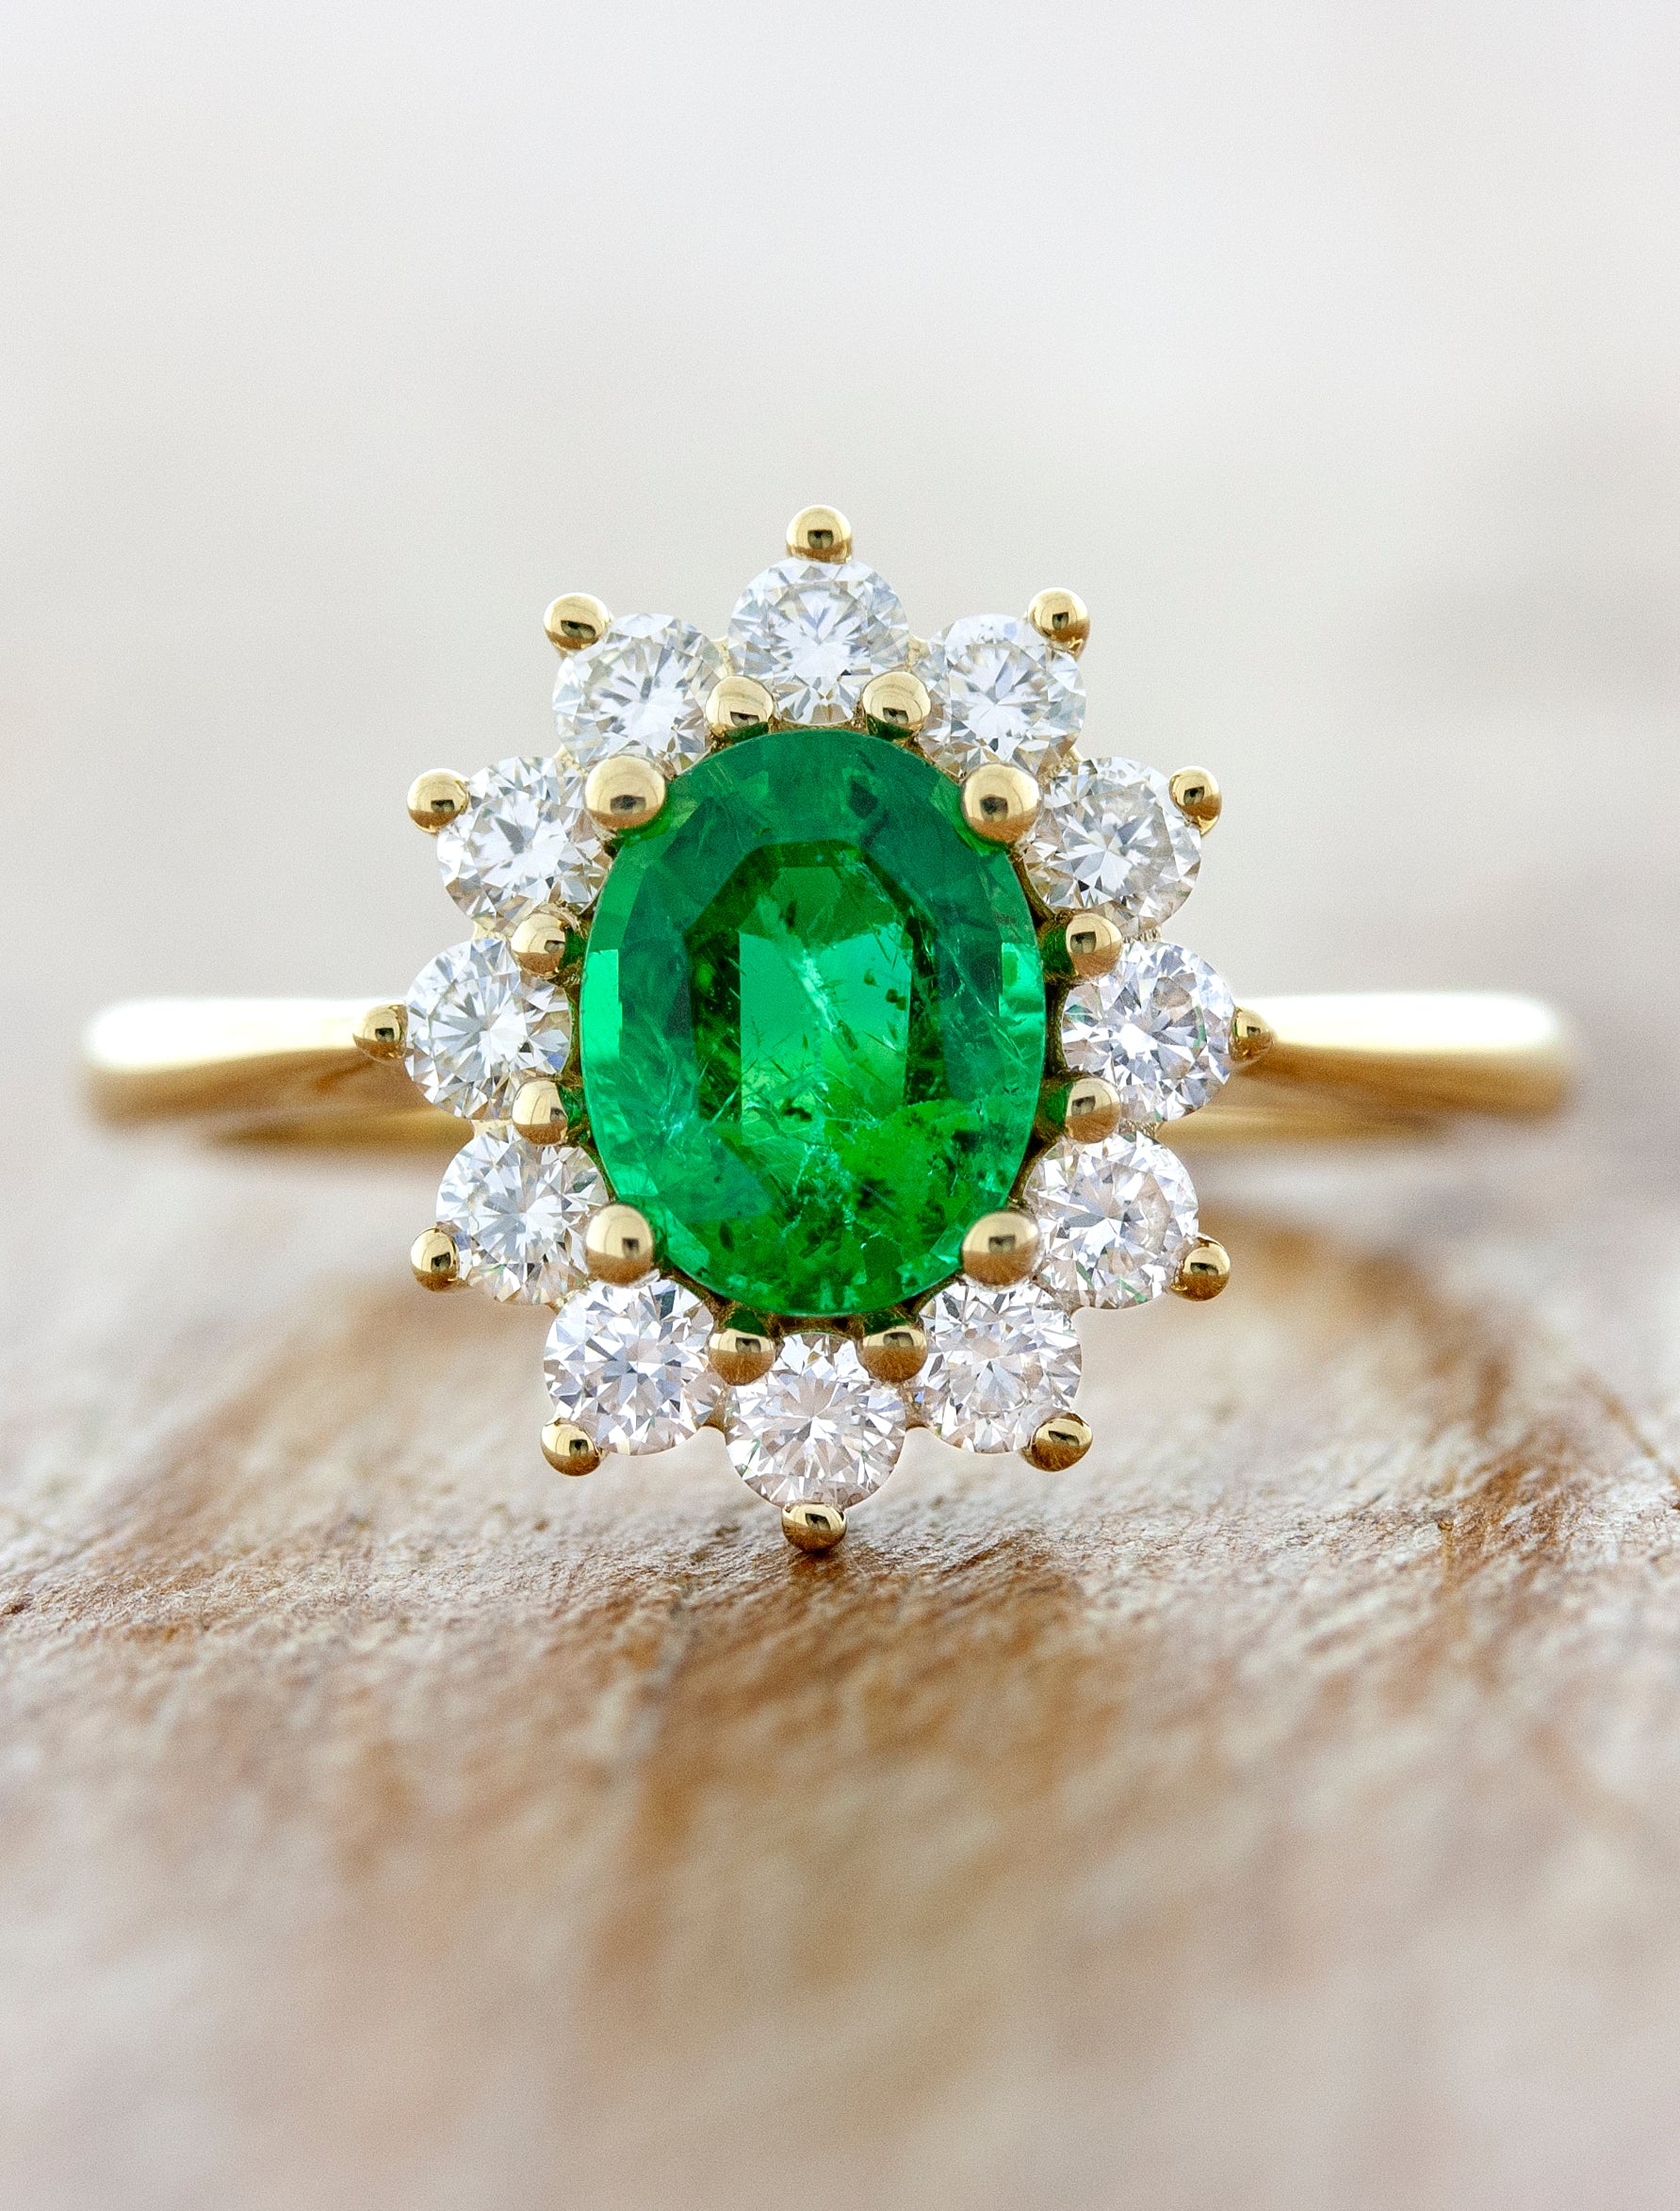 EMERALD STATEMENT RING IN 14KT GOLD WITH UNCUT DIAMONDS – Symetree